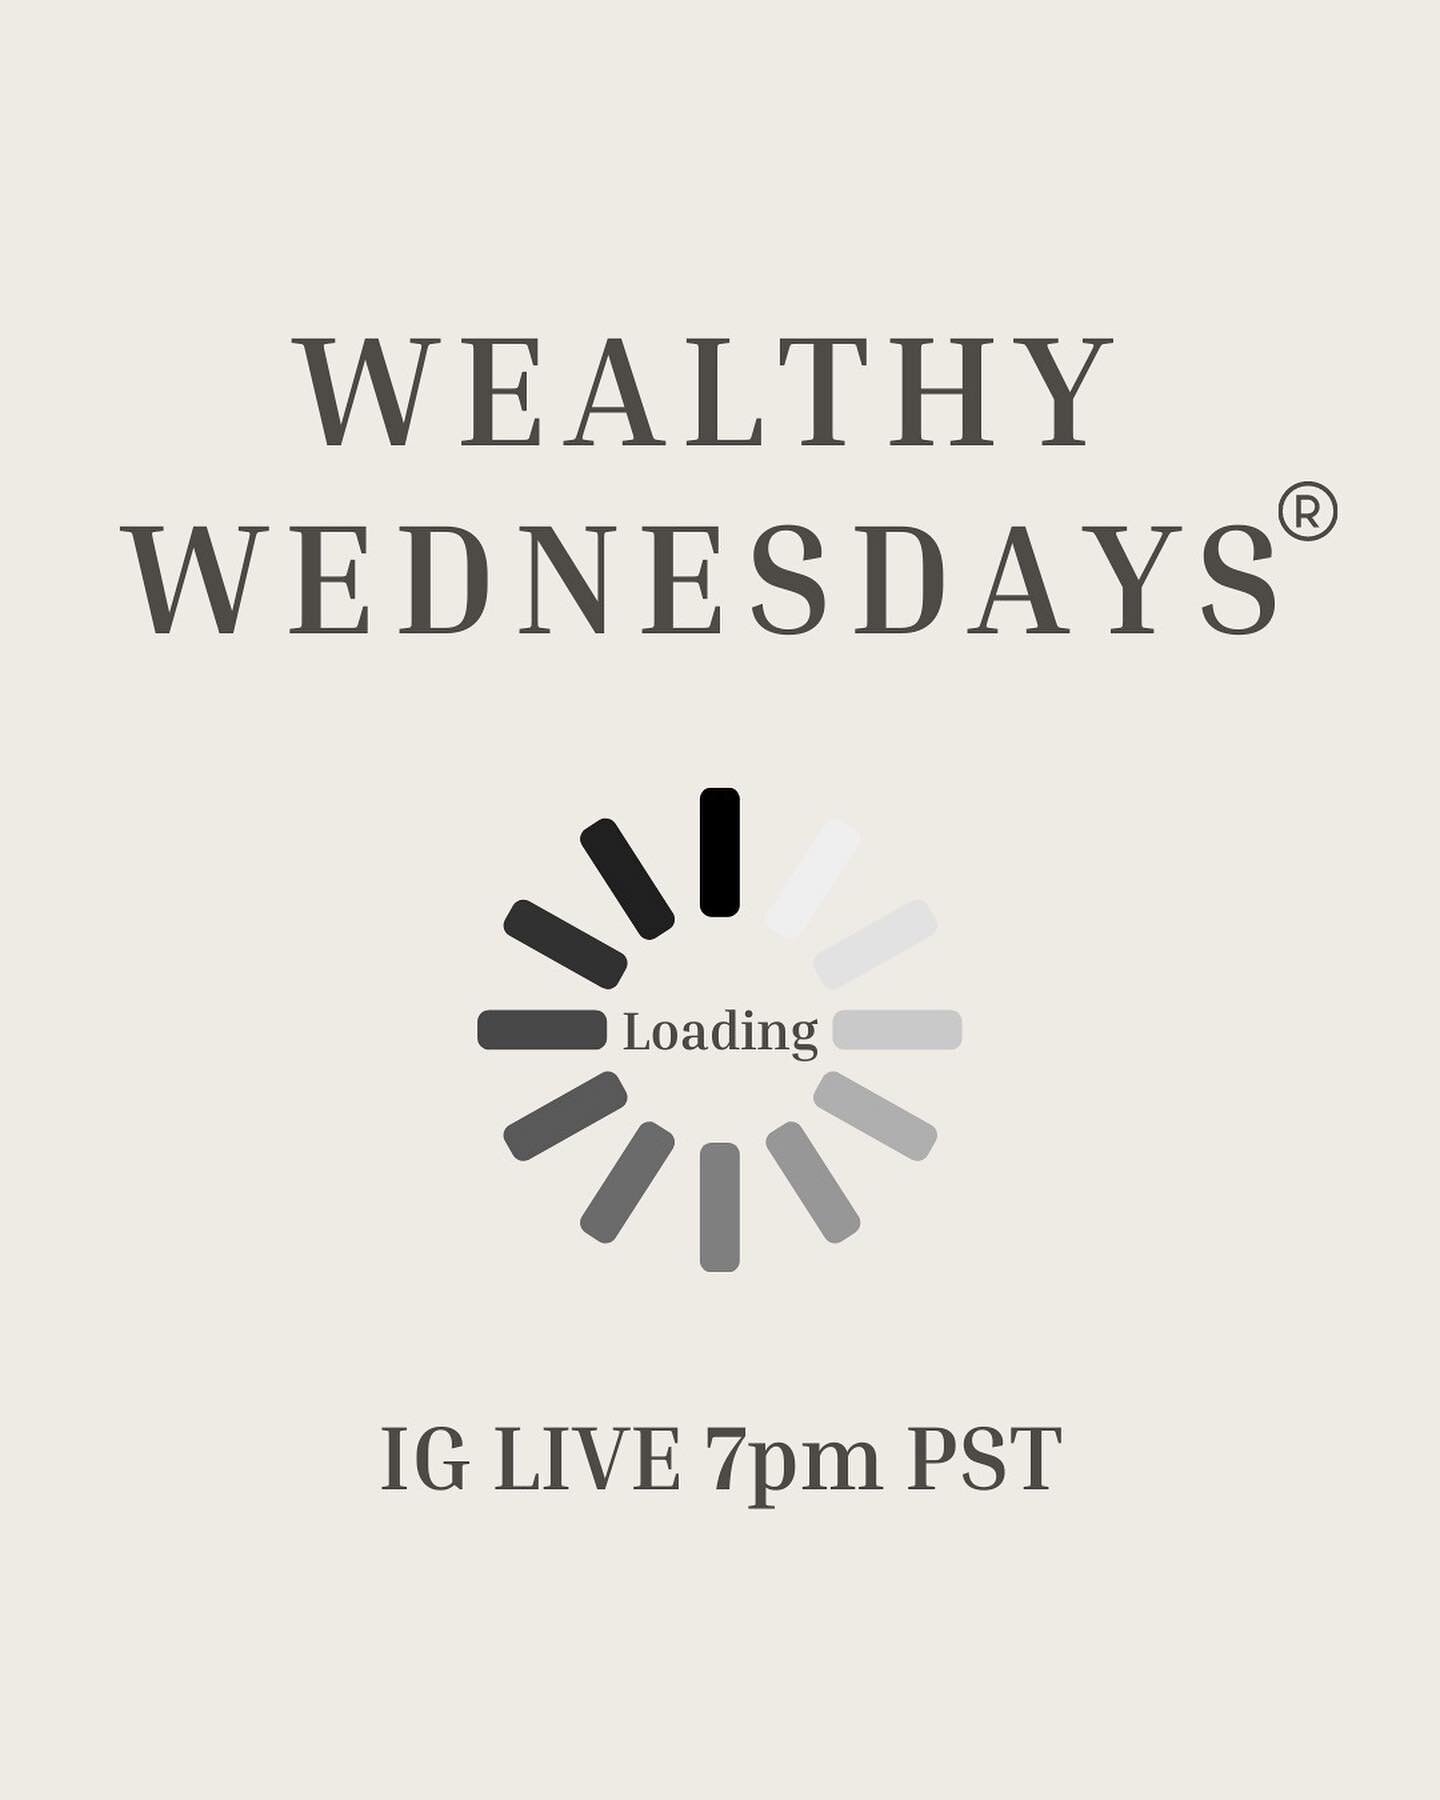 Set your alarms! Join me tonight, Wednesday at 7pm PST on Instagram Live! Tune in tonight and tag a friend!&nbsp; It's going to be a good one you won't want to miss tonight.&nbsp;

Swipe for some inspiration for the day! See you tonight! 

#financial